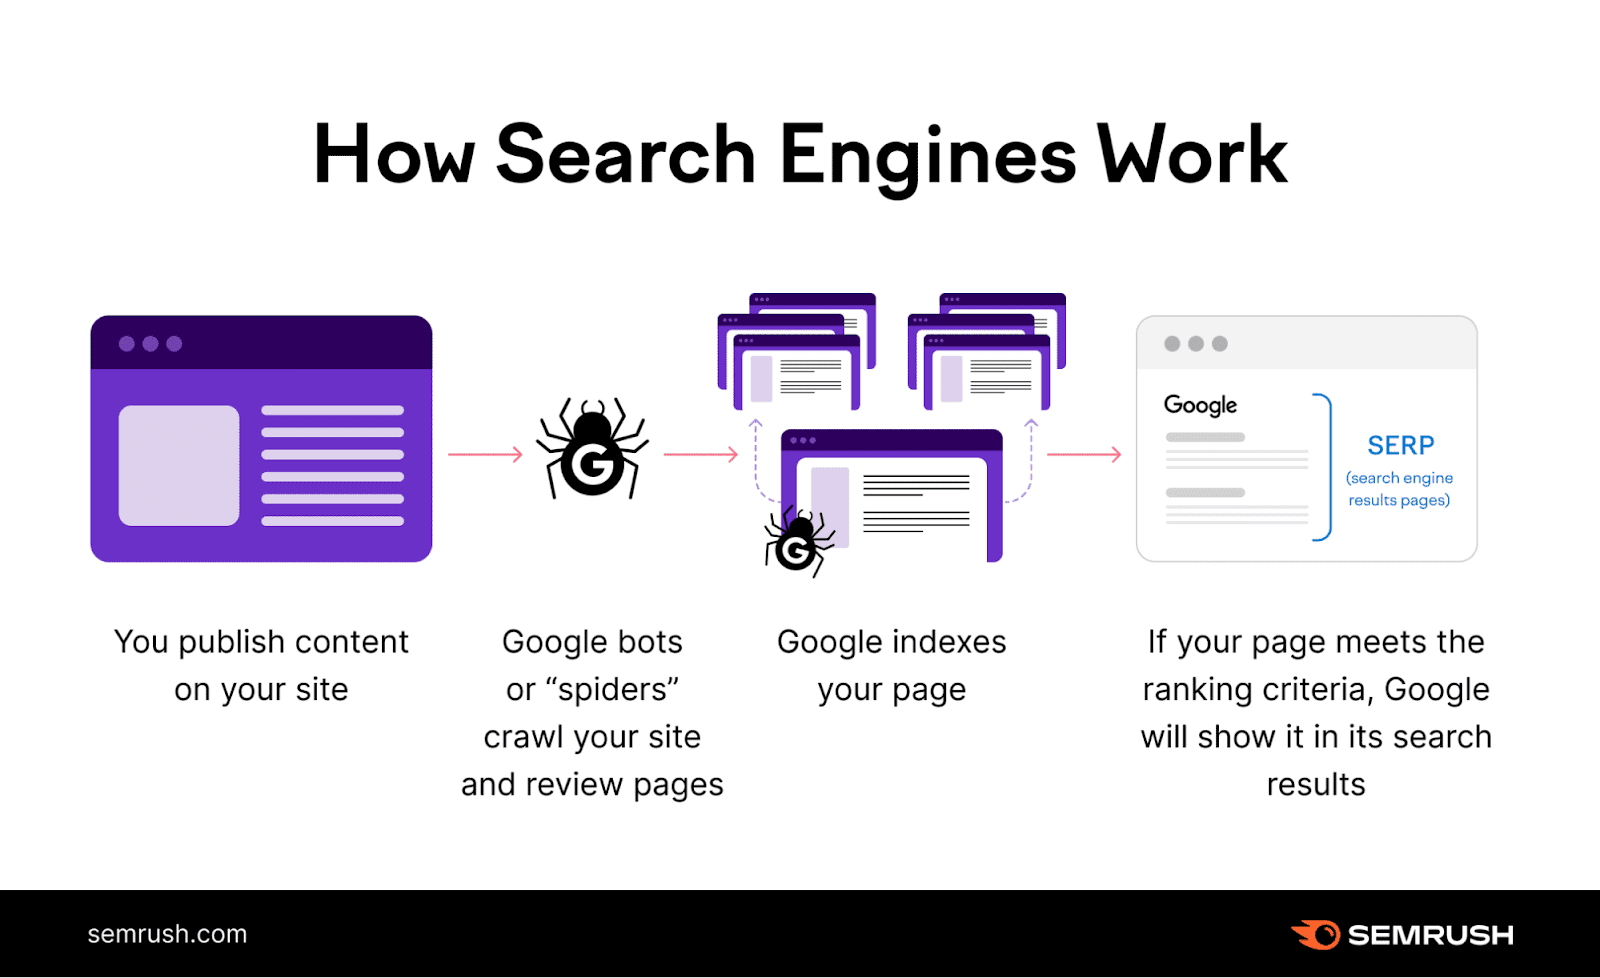 A graphic showing how search engines work